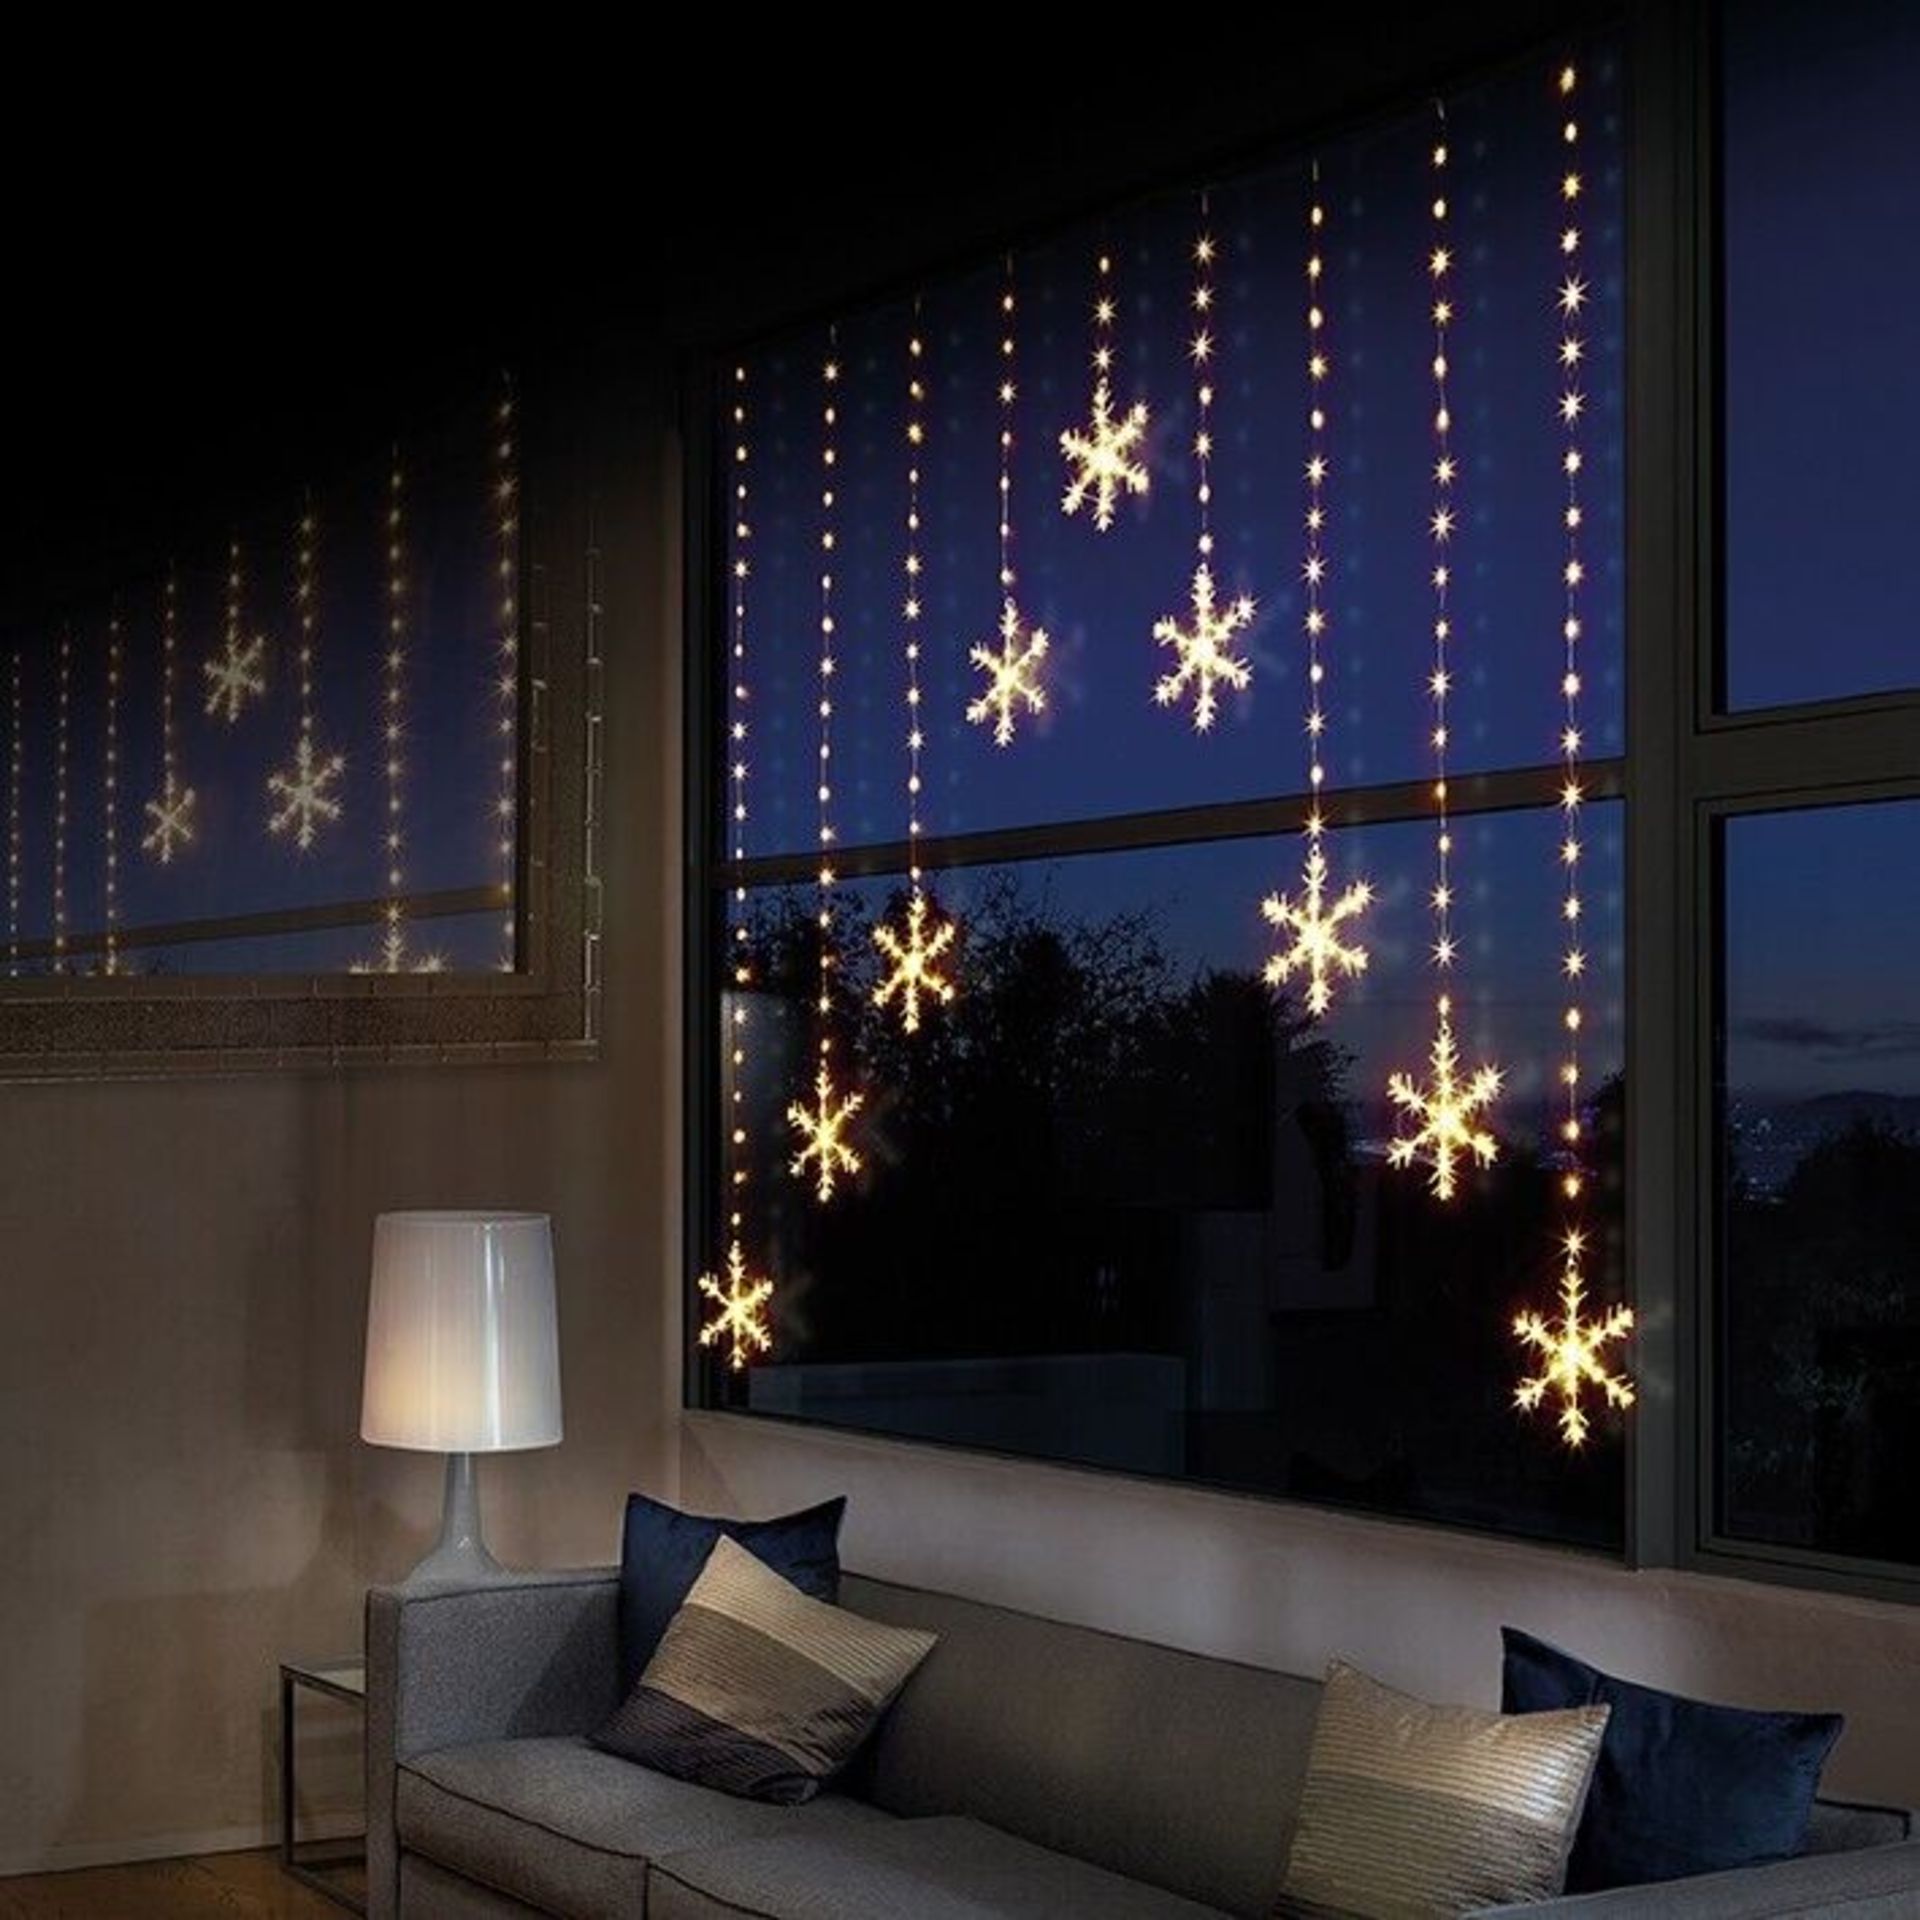 OUTDOOR CHRISTMAS LIGHTS DECORATIVE HANGING WARM WHITE SNOWFLAKE STRING 339 LED - Image 2 of 2